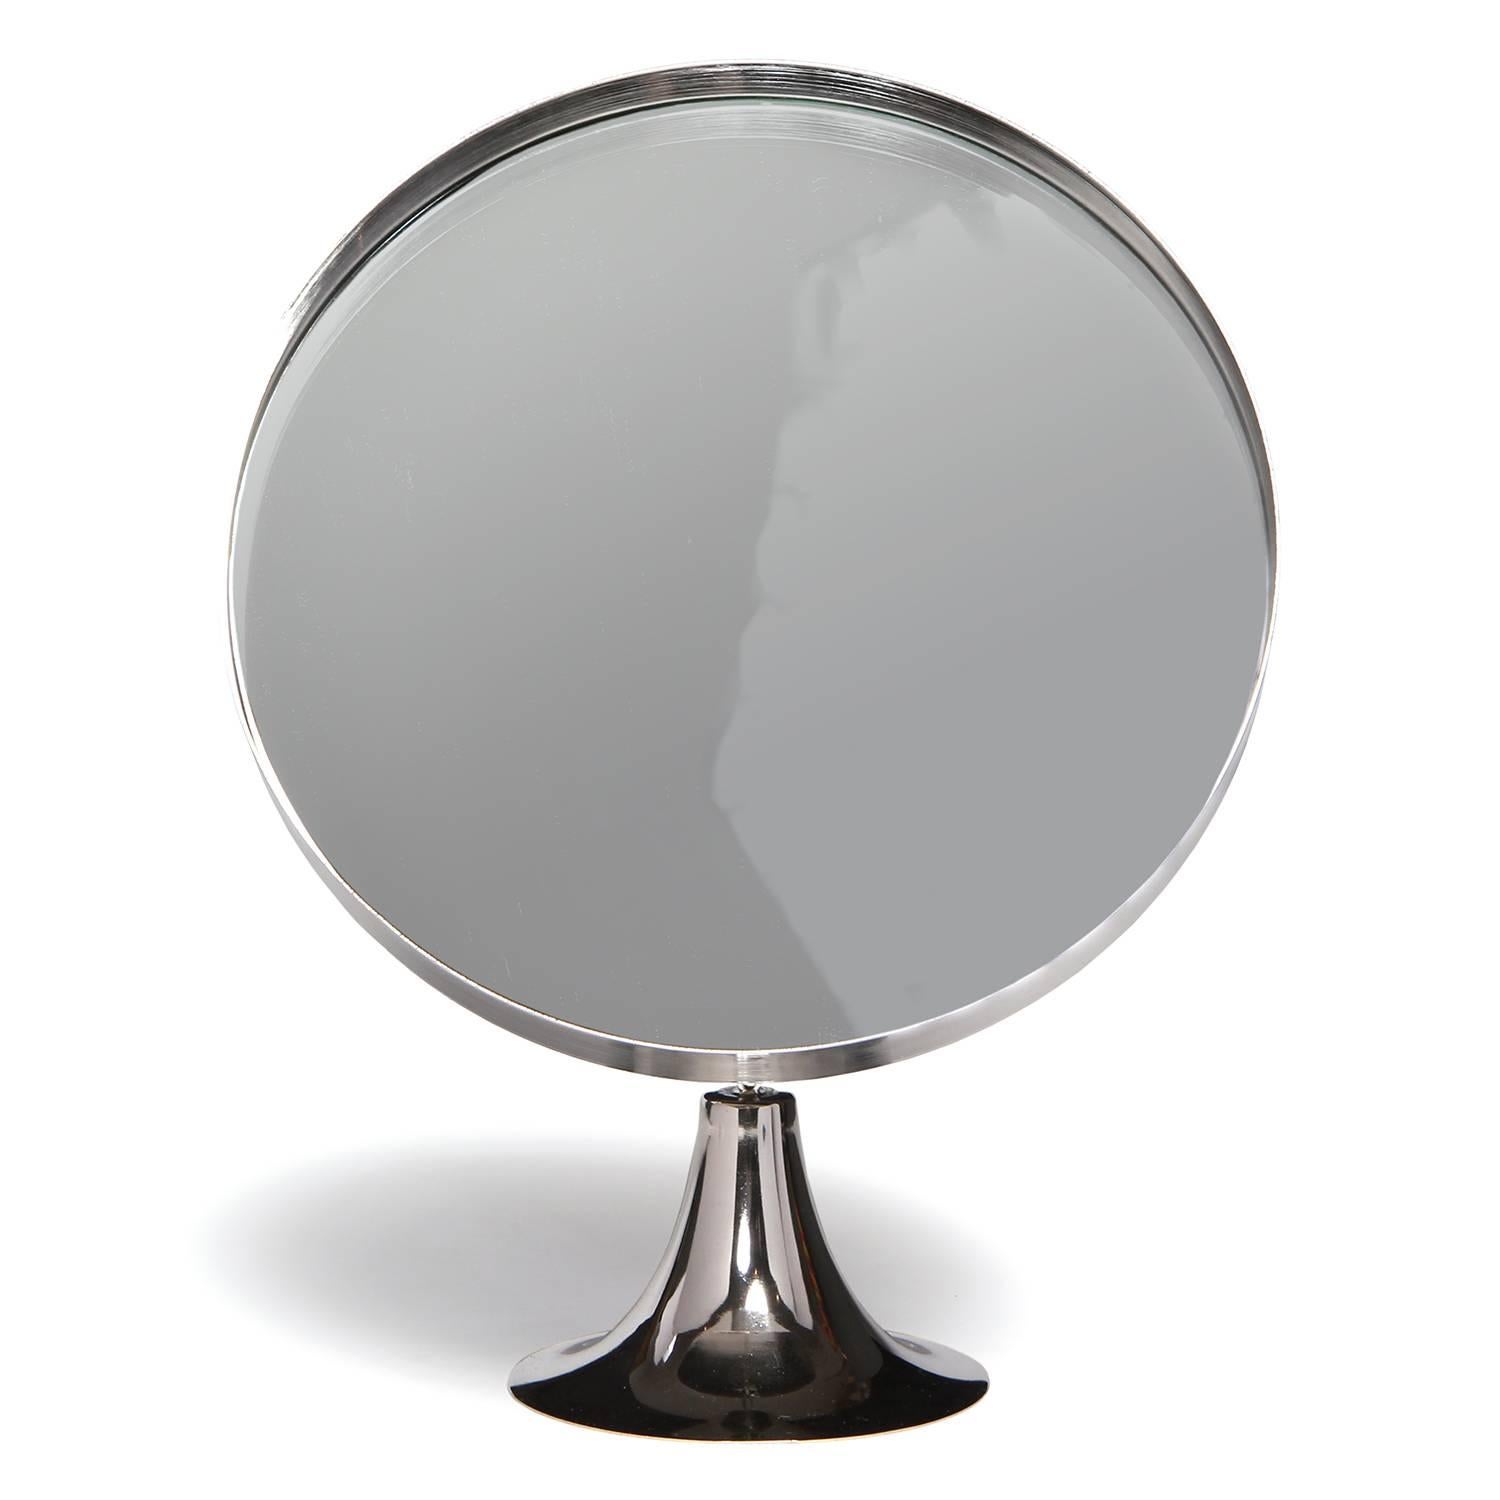 A Minimalist and refined table mirror in stainless steel having a sculptural pedestal base supporting a floating tilting mirror.